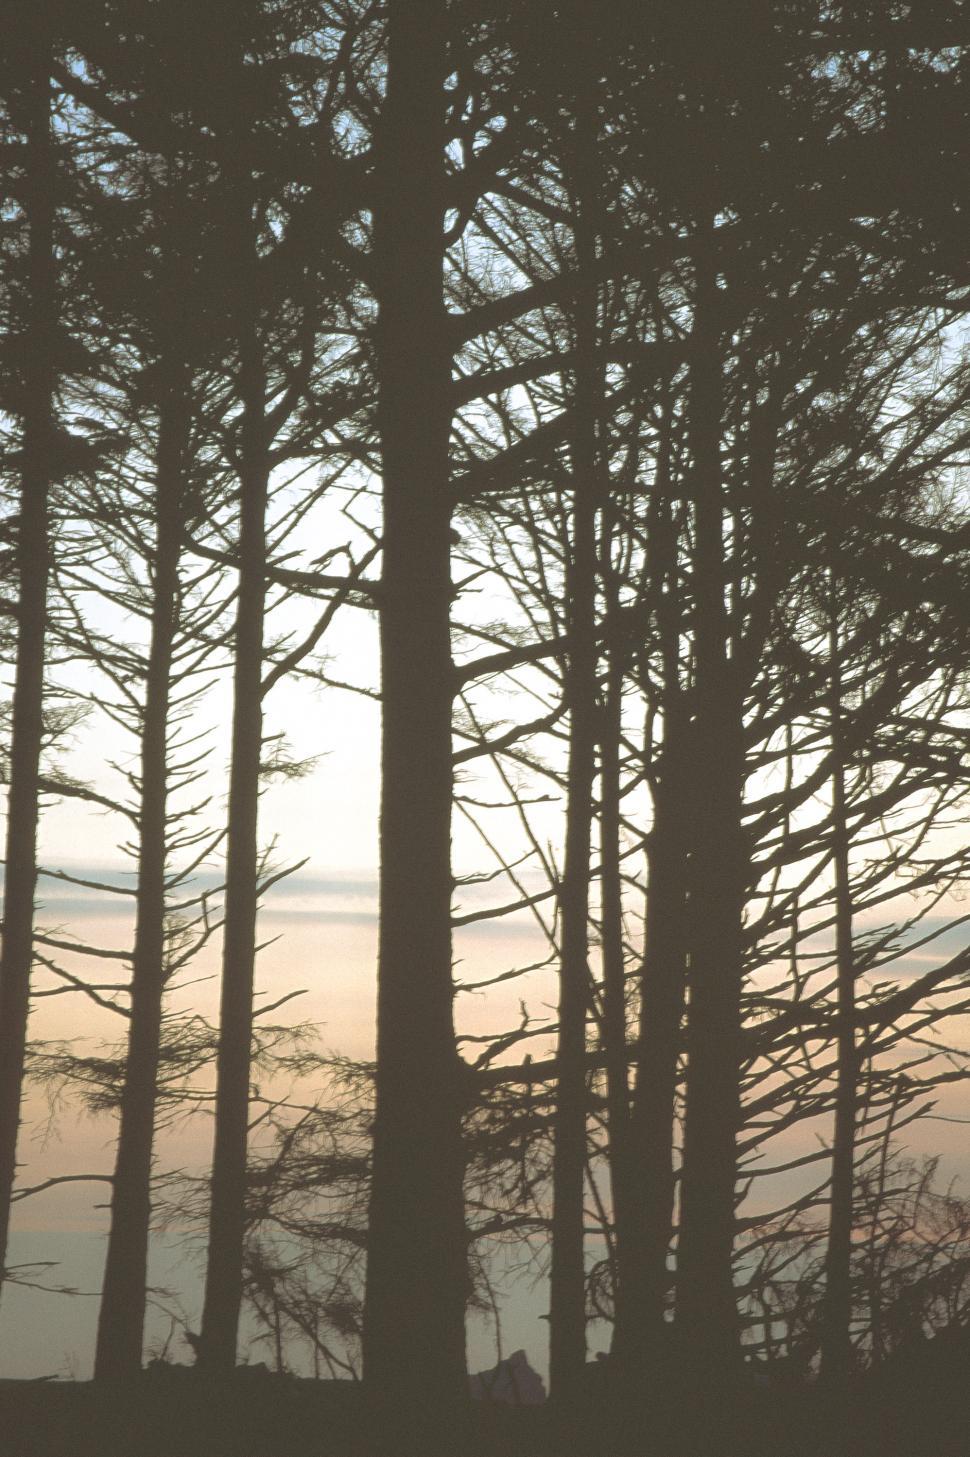 Treeline Silhouette Stock Photos, Images and Backgrounds for Free Download